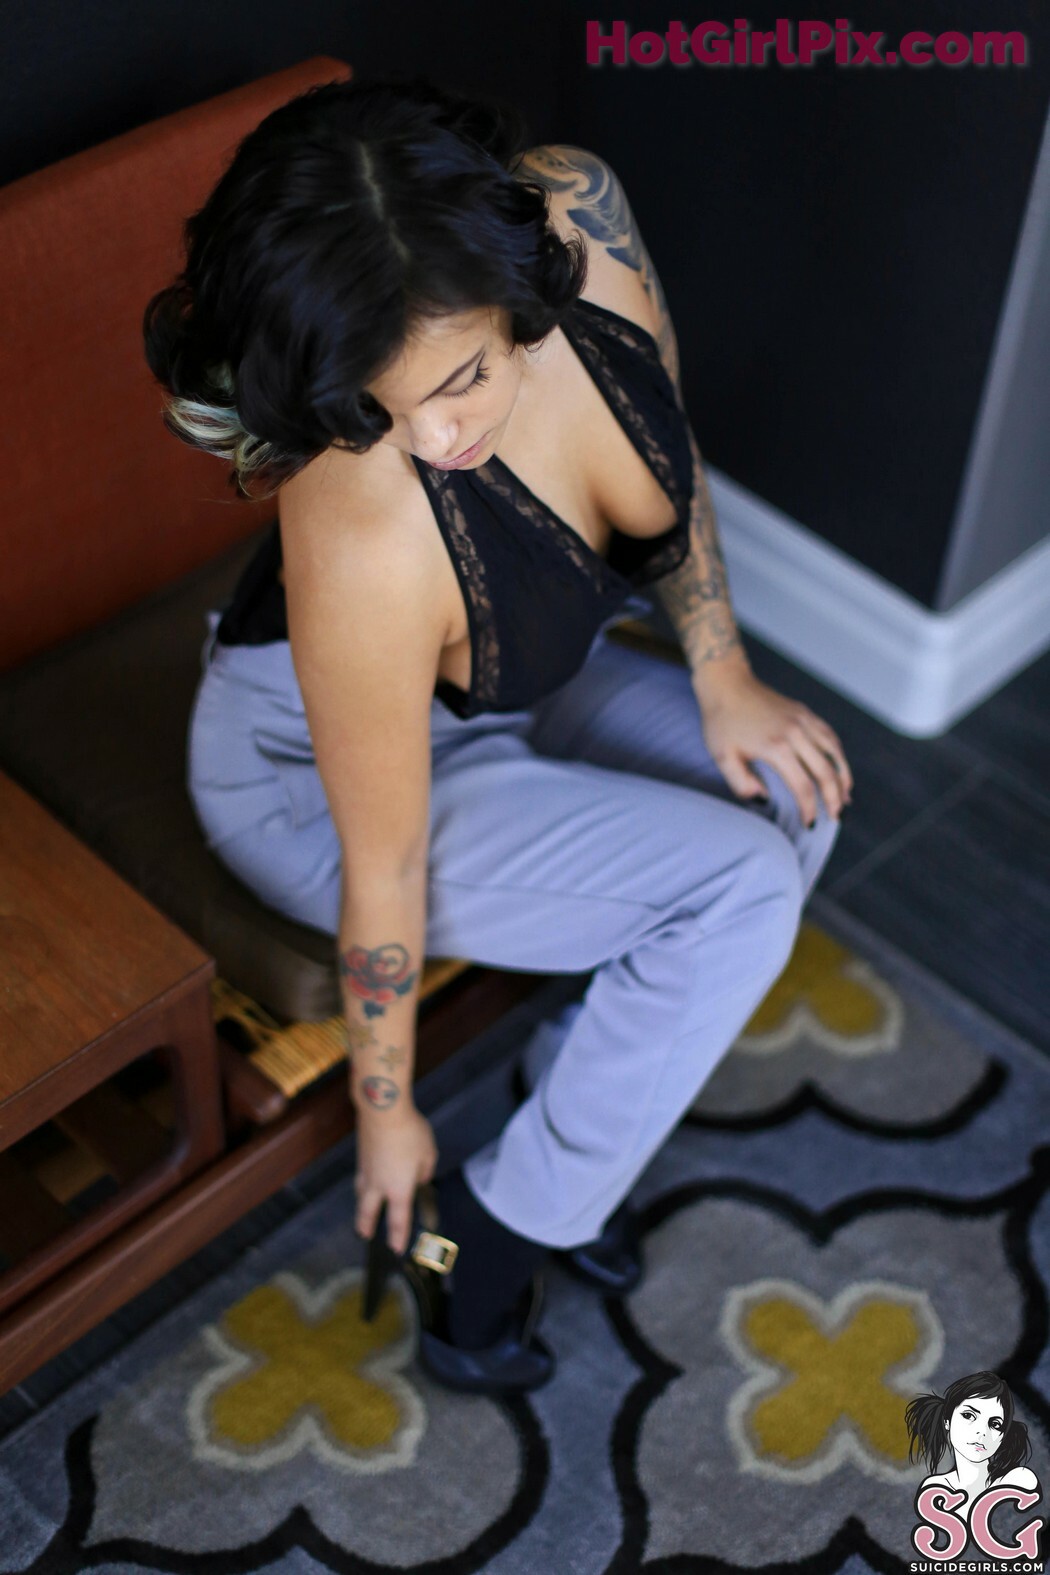 [Suicide Girls] Bixton - 'I have to see a man about a dog'